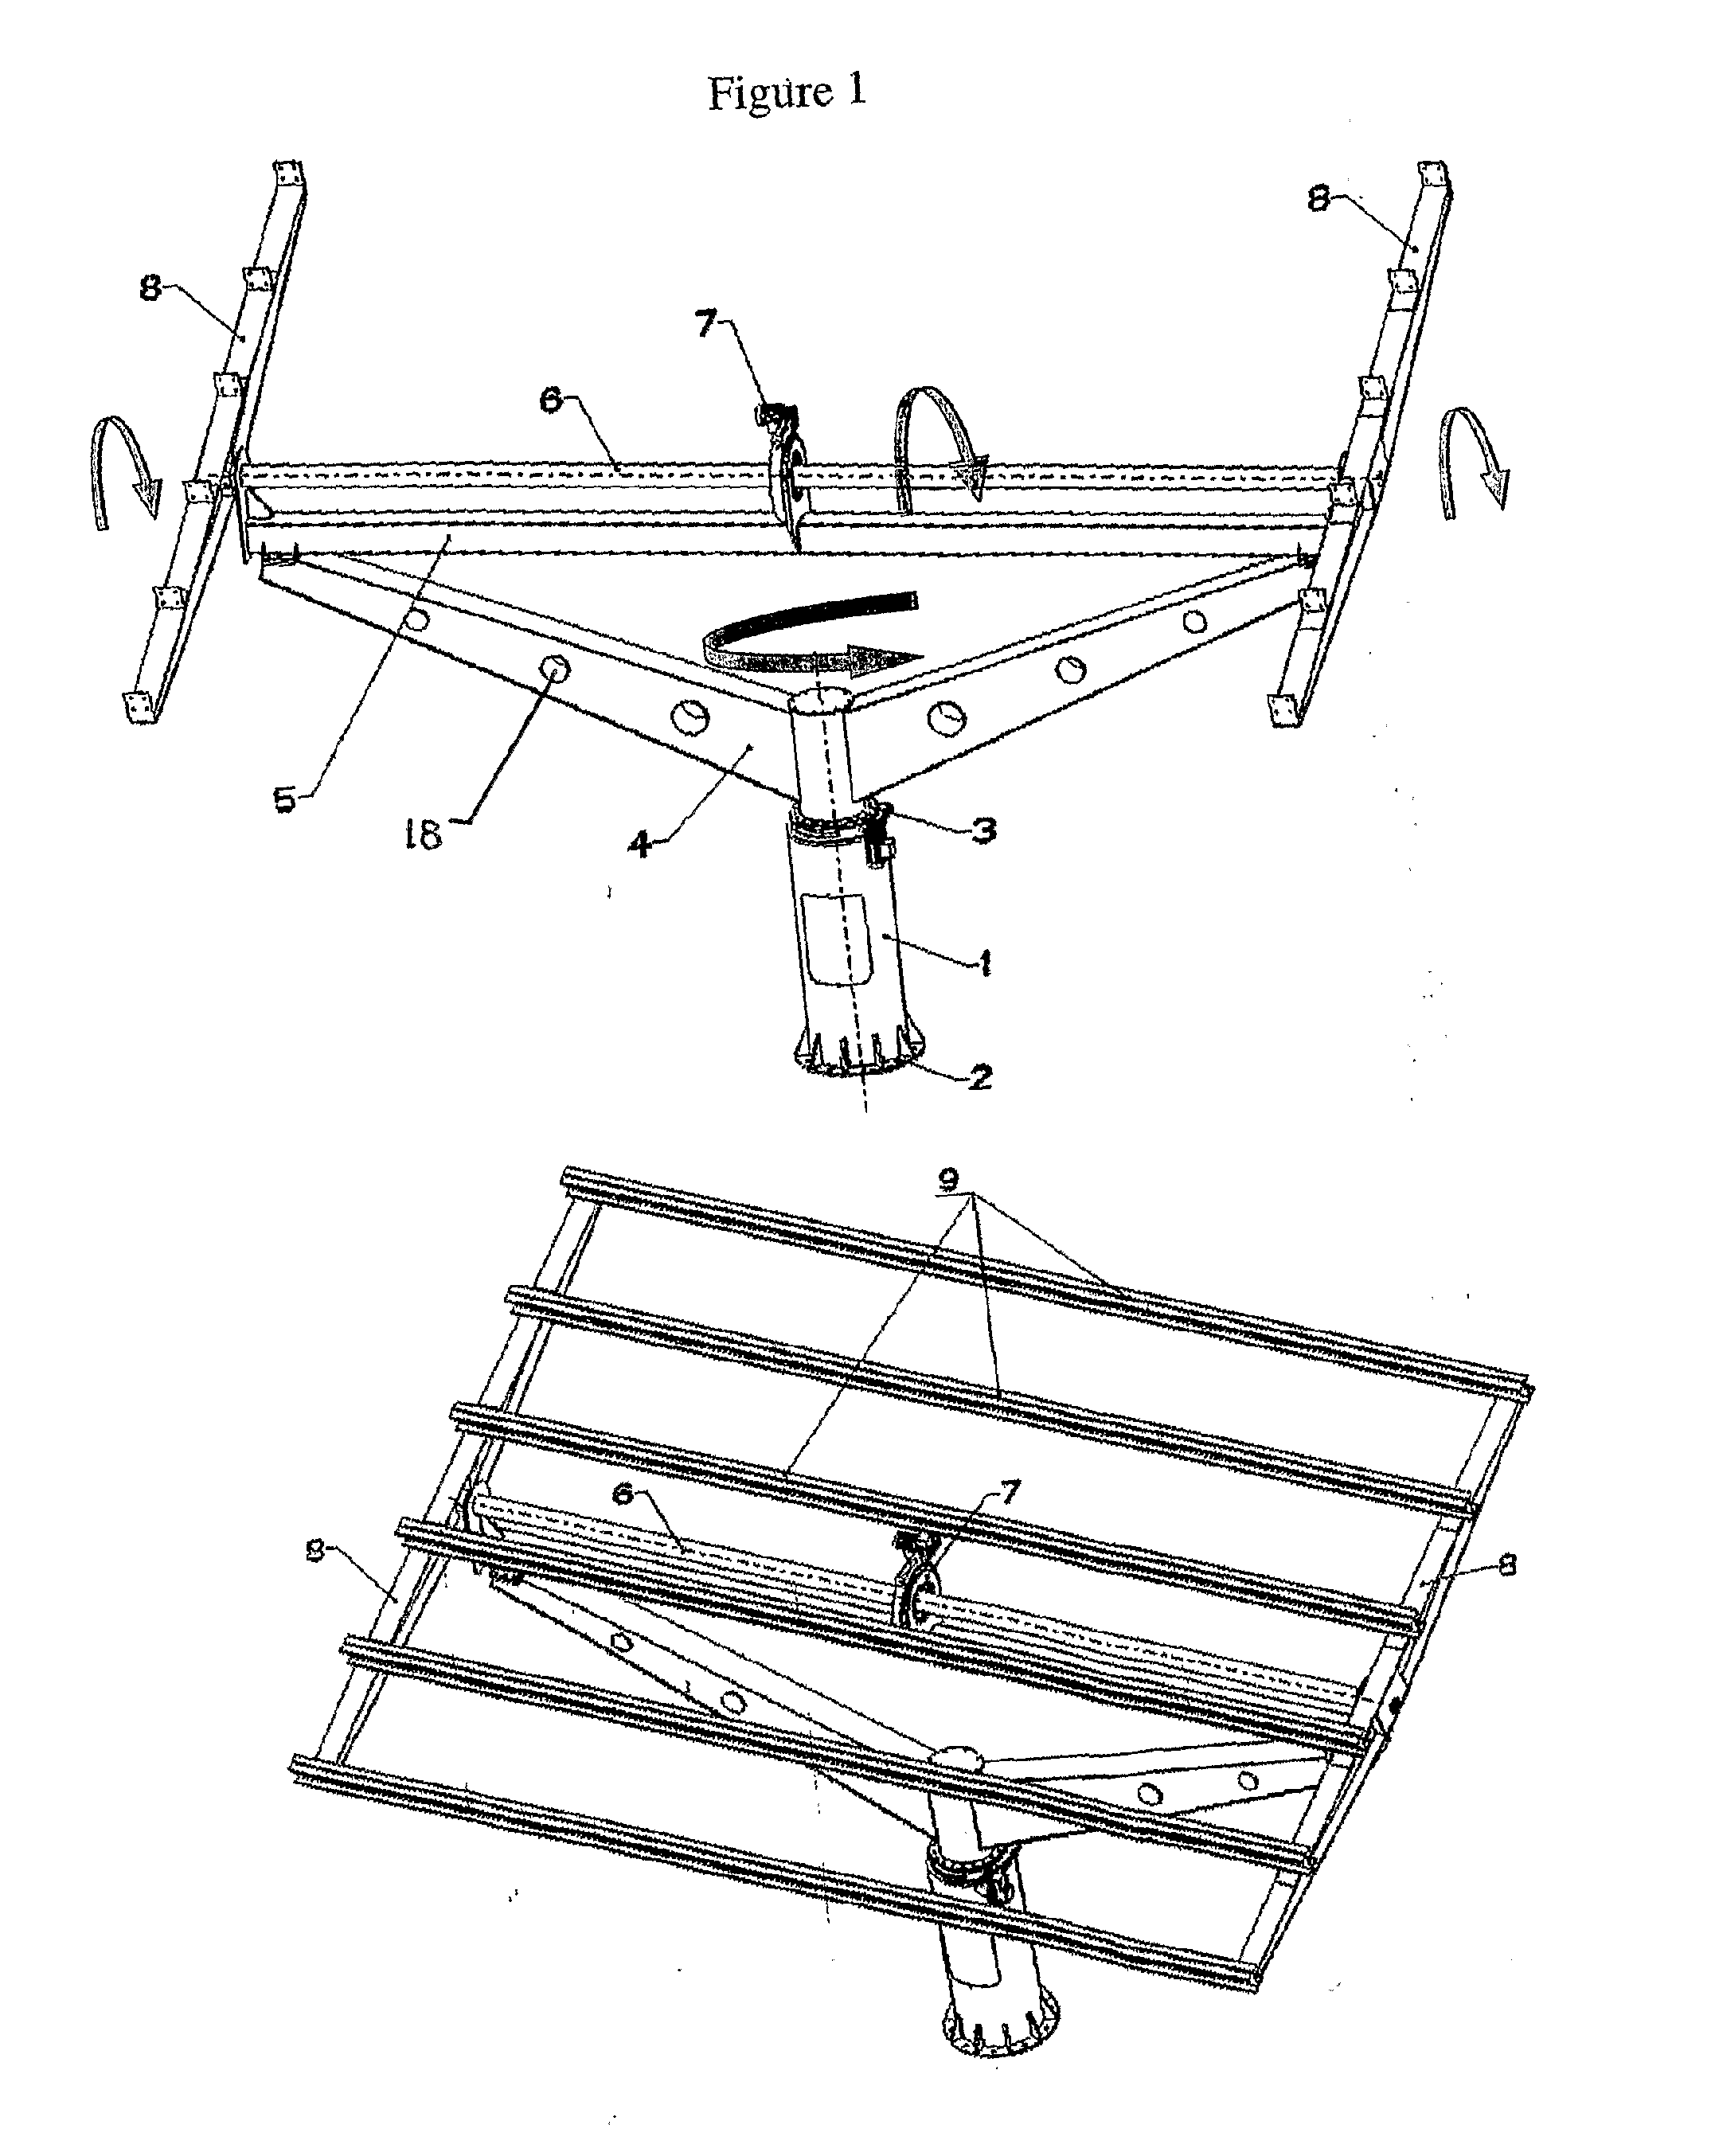 Photovoltaic panel support base rotating simultaneously around a horizontal and a vertical axis